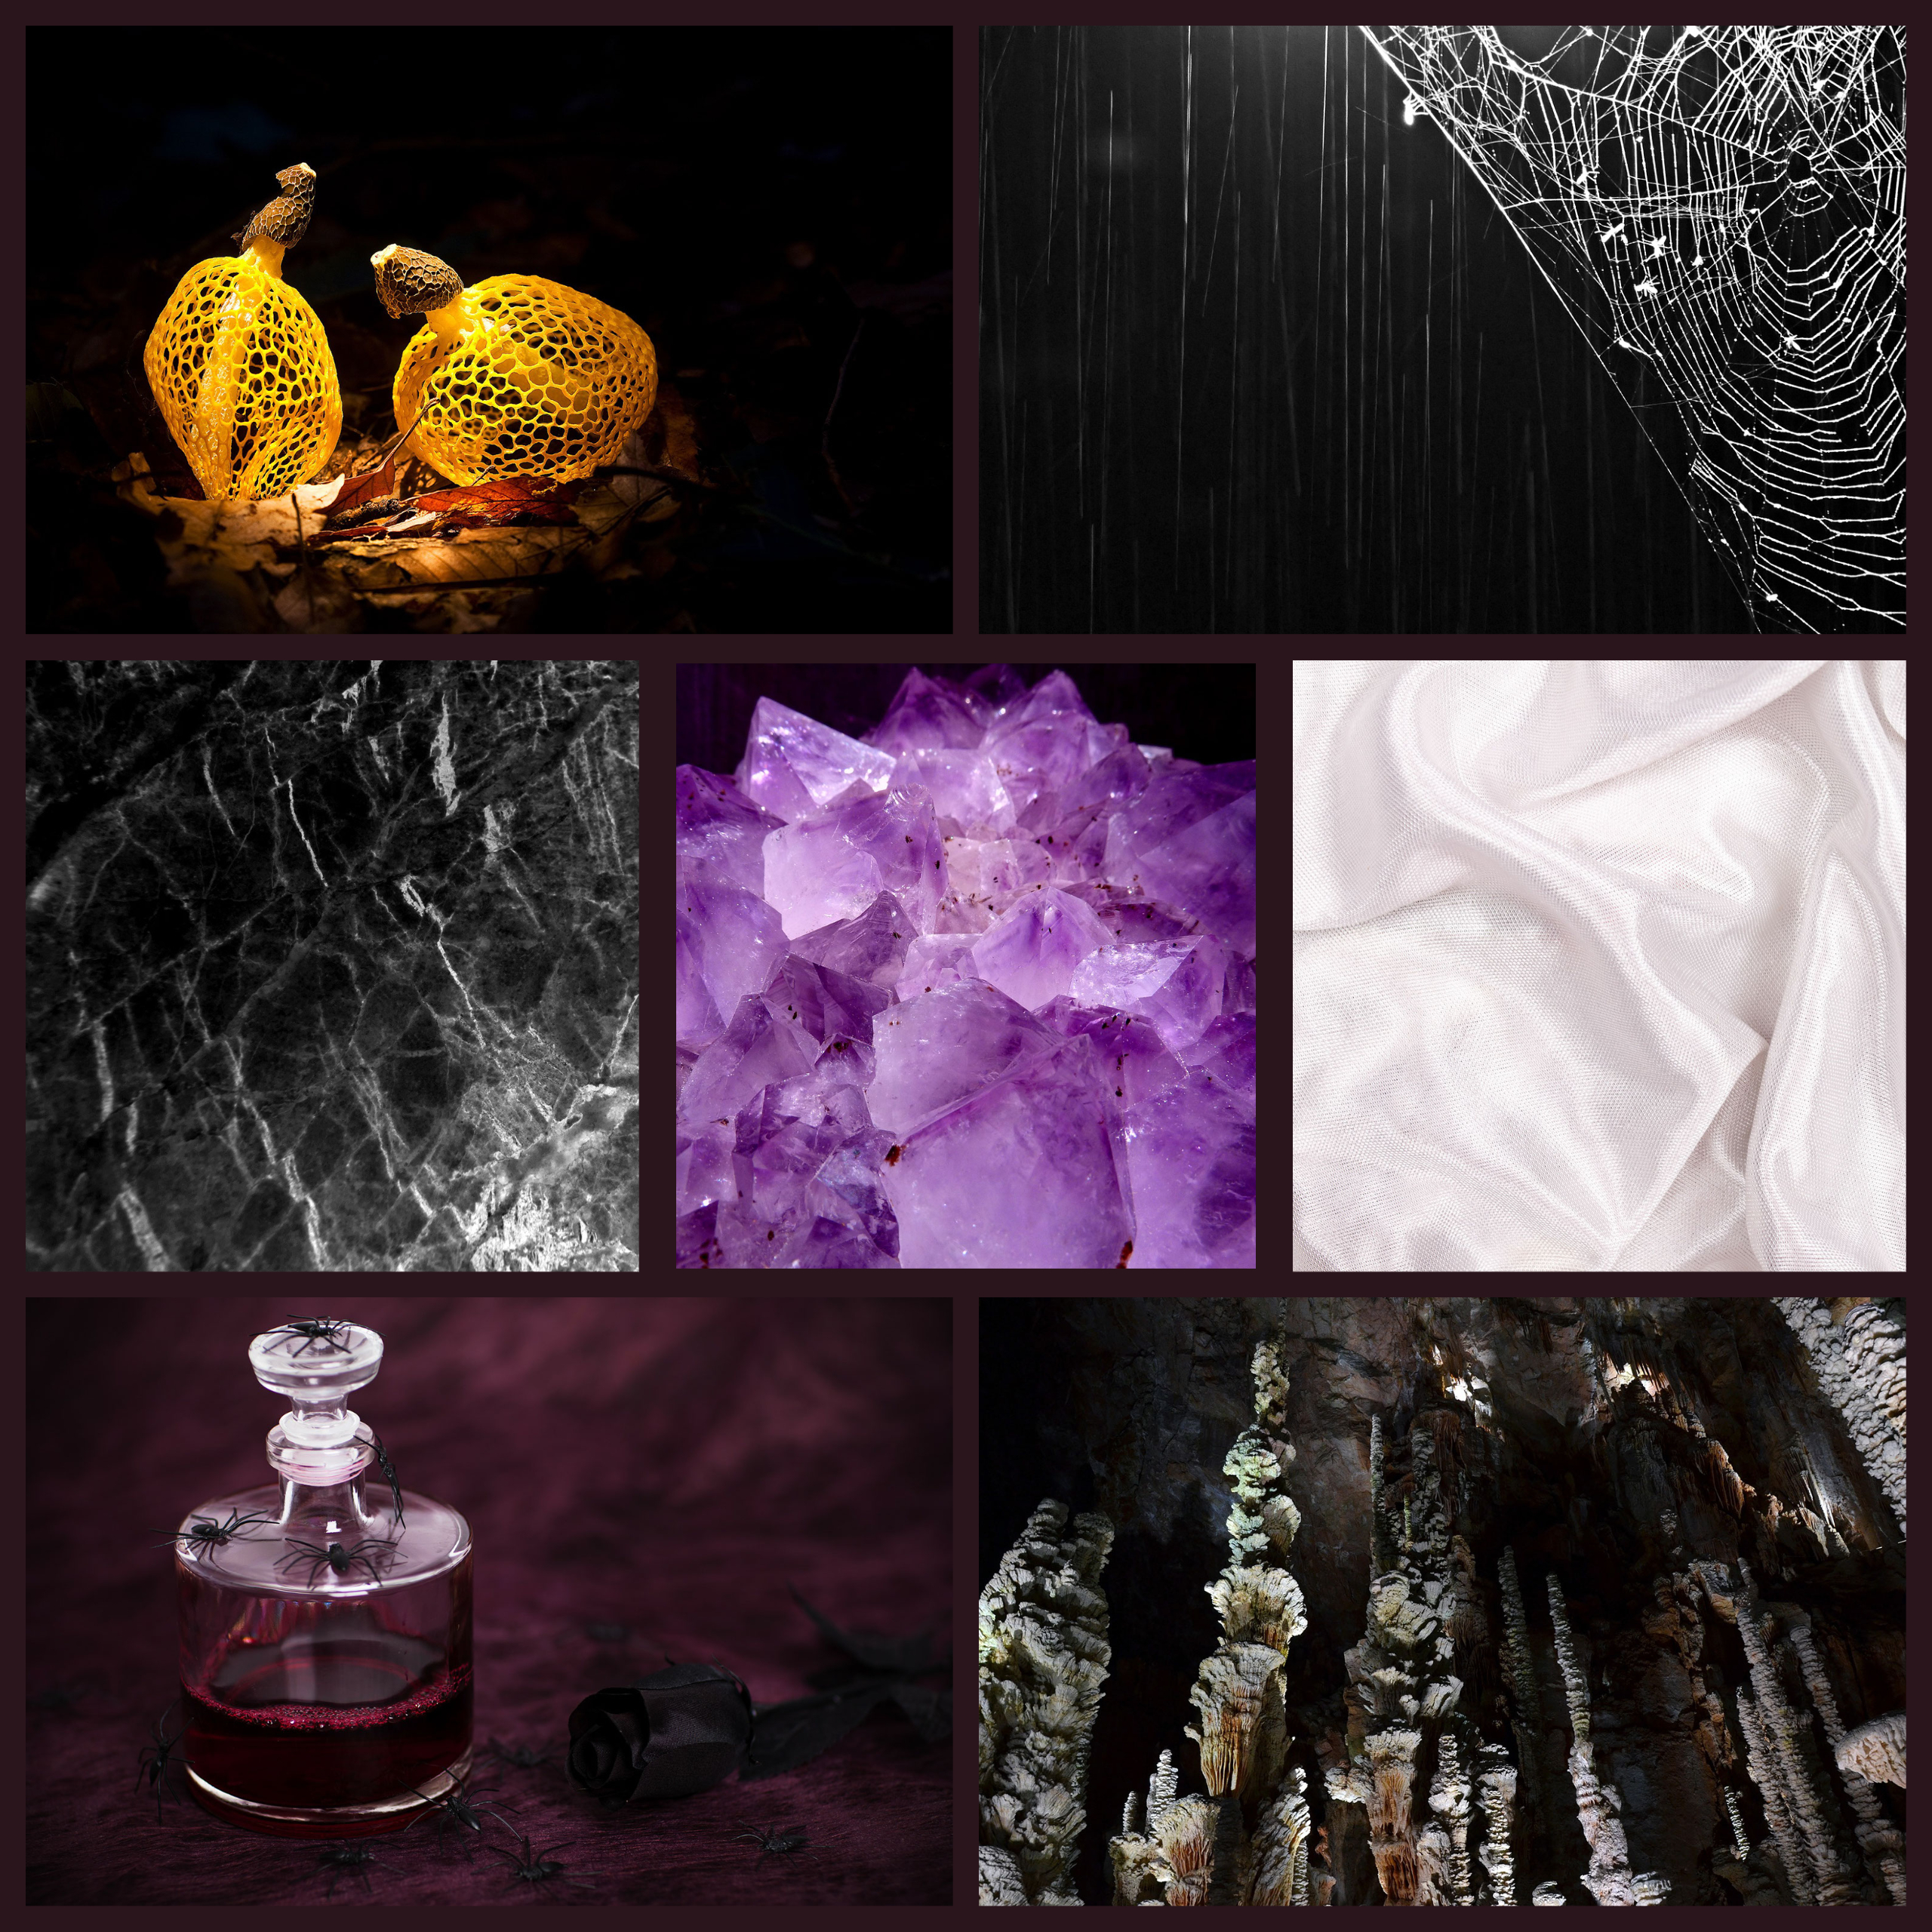 A collage of images in a purple, black, and white theme with accents of yellow or gold. Images in include mushrooms, stone, and spiders